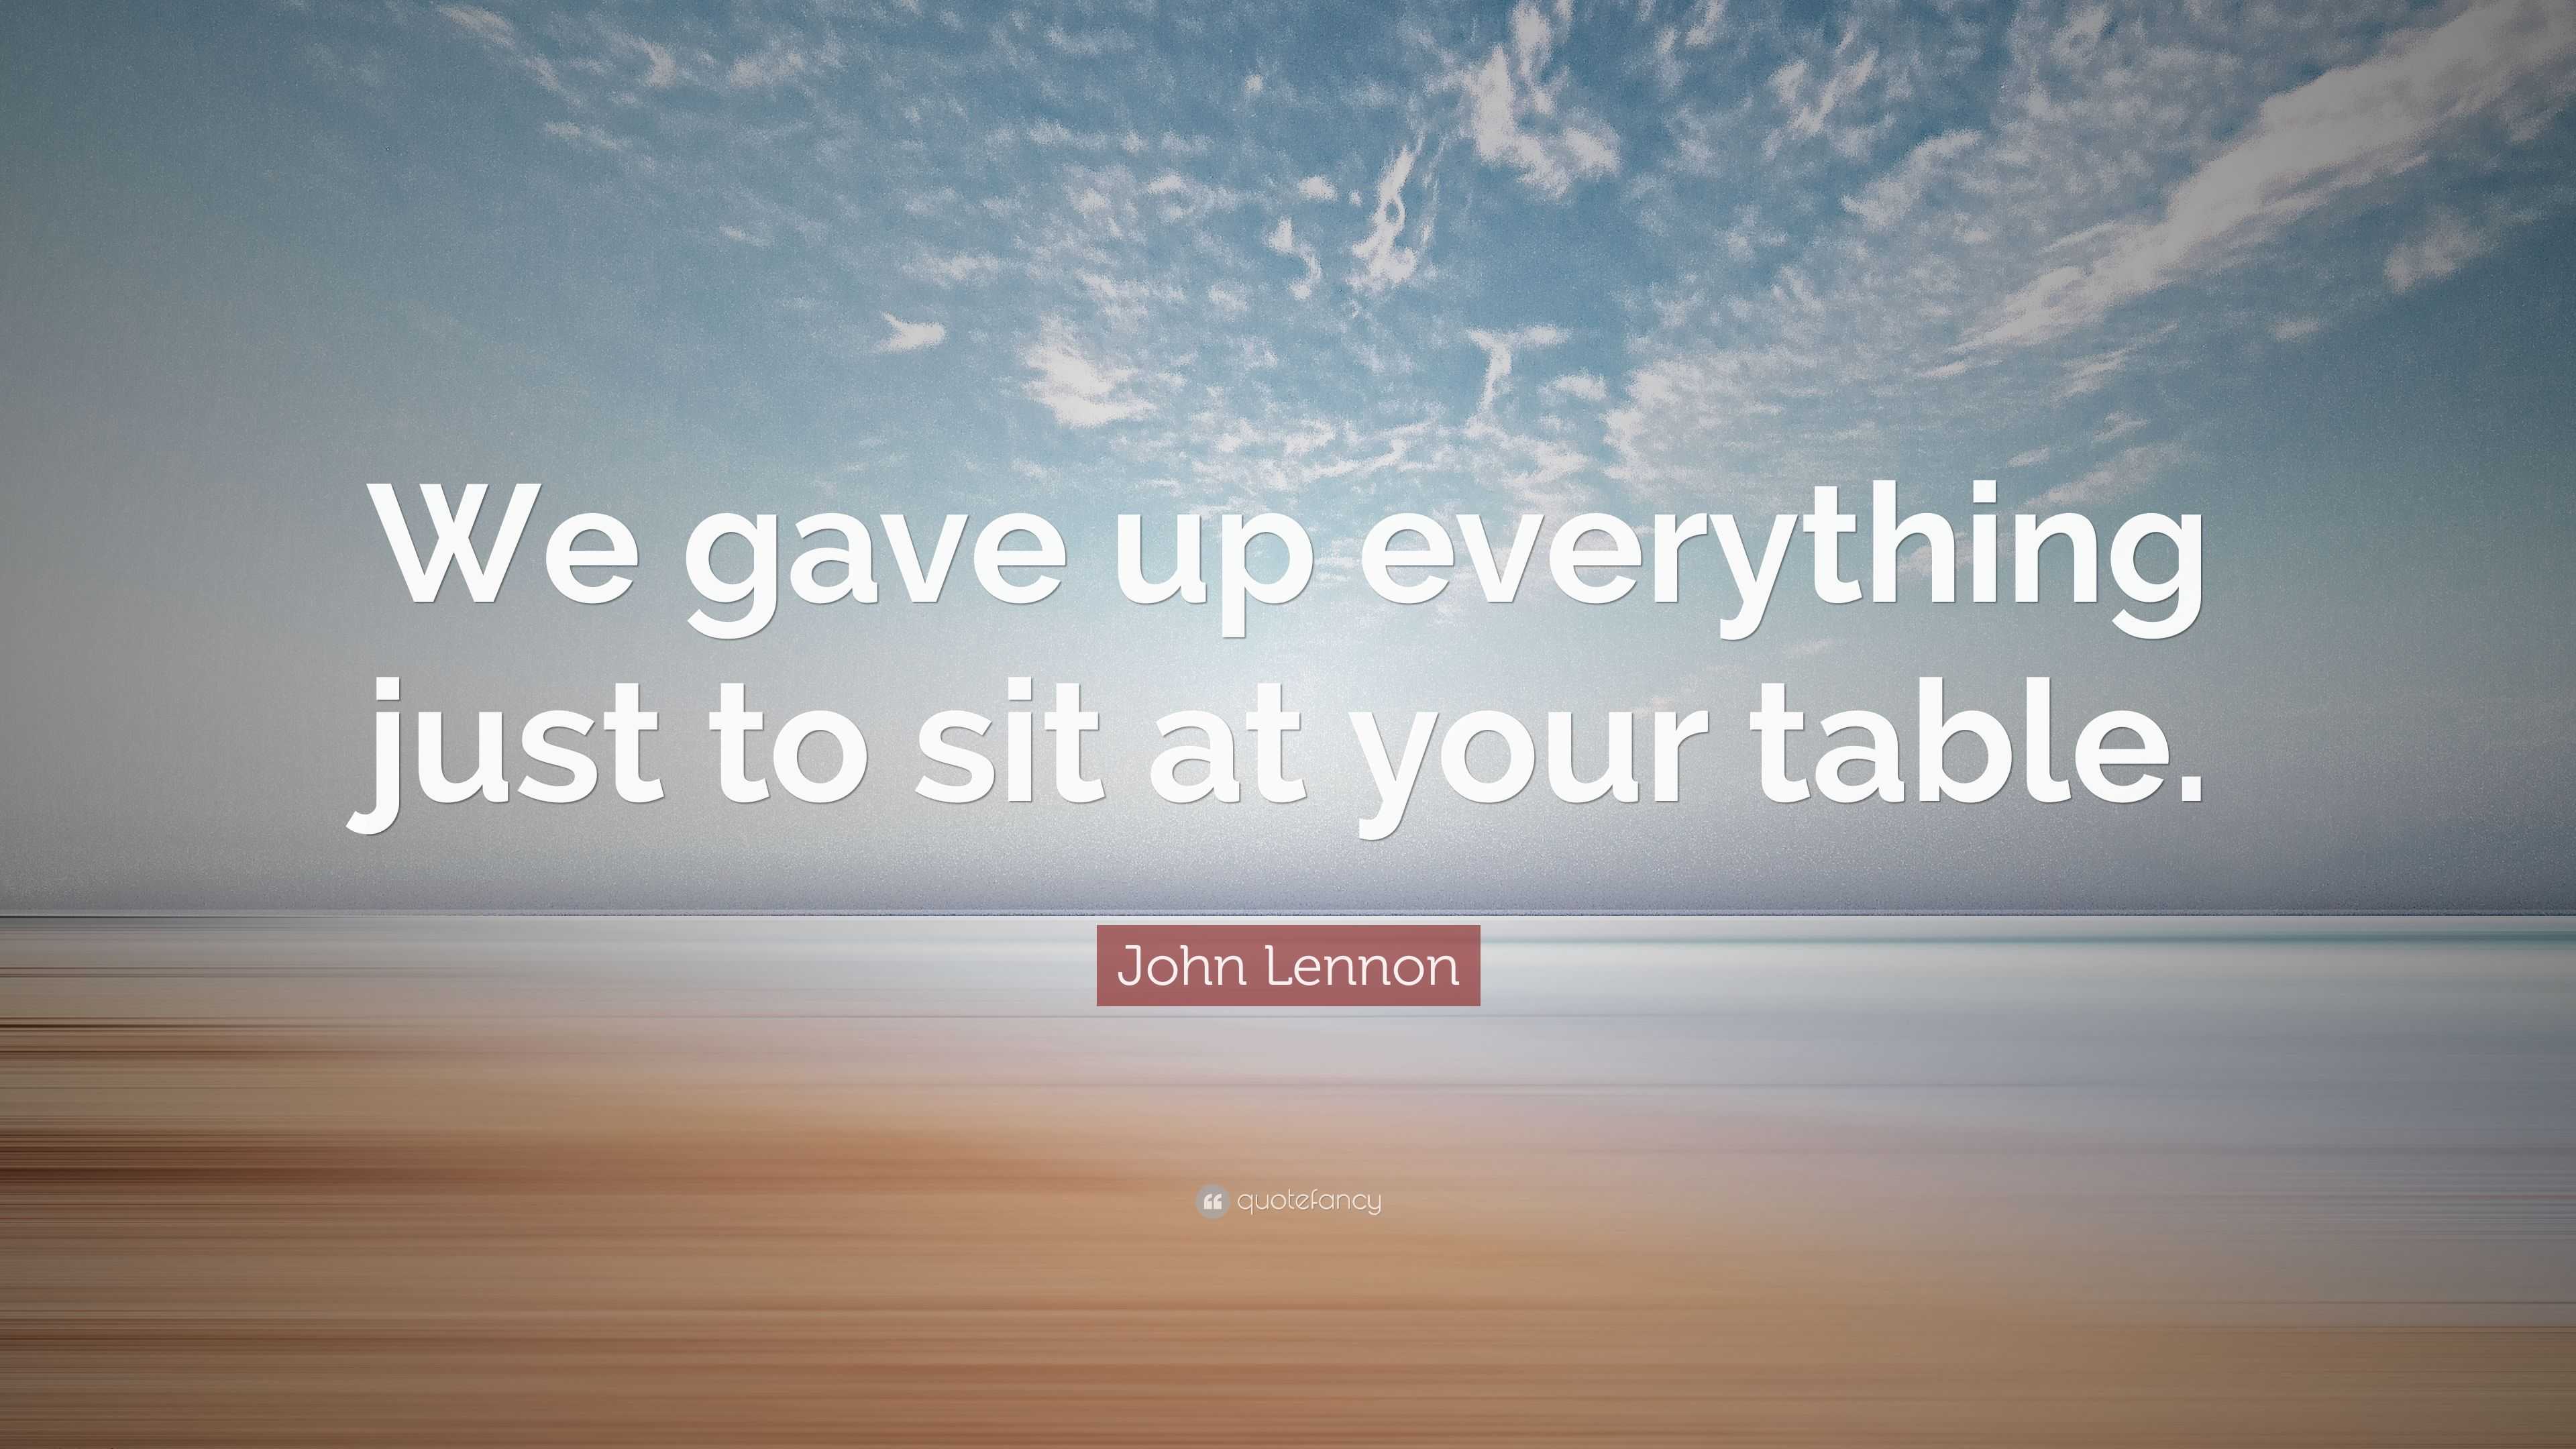 3685164 John Lennon Quote We Gave Up Everything Just To Sit At Your Table 